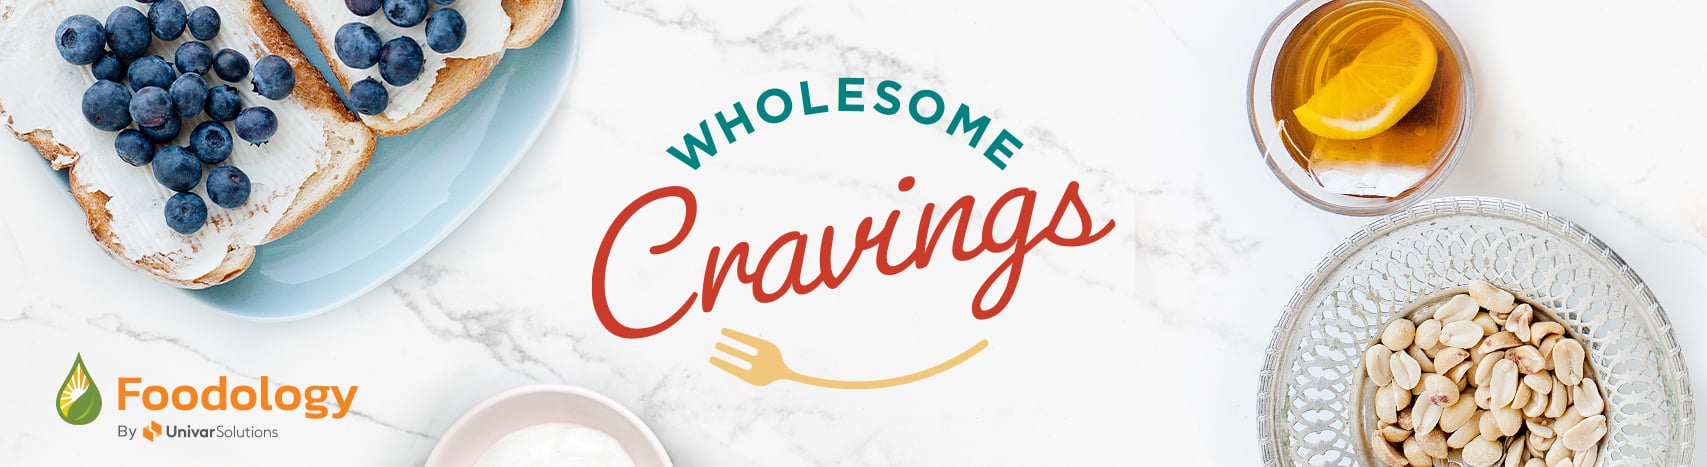 Healthier food and beverages on a marble table with the Foodology logo and the words "Wholesome Cravings"